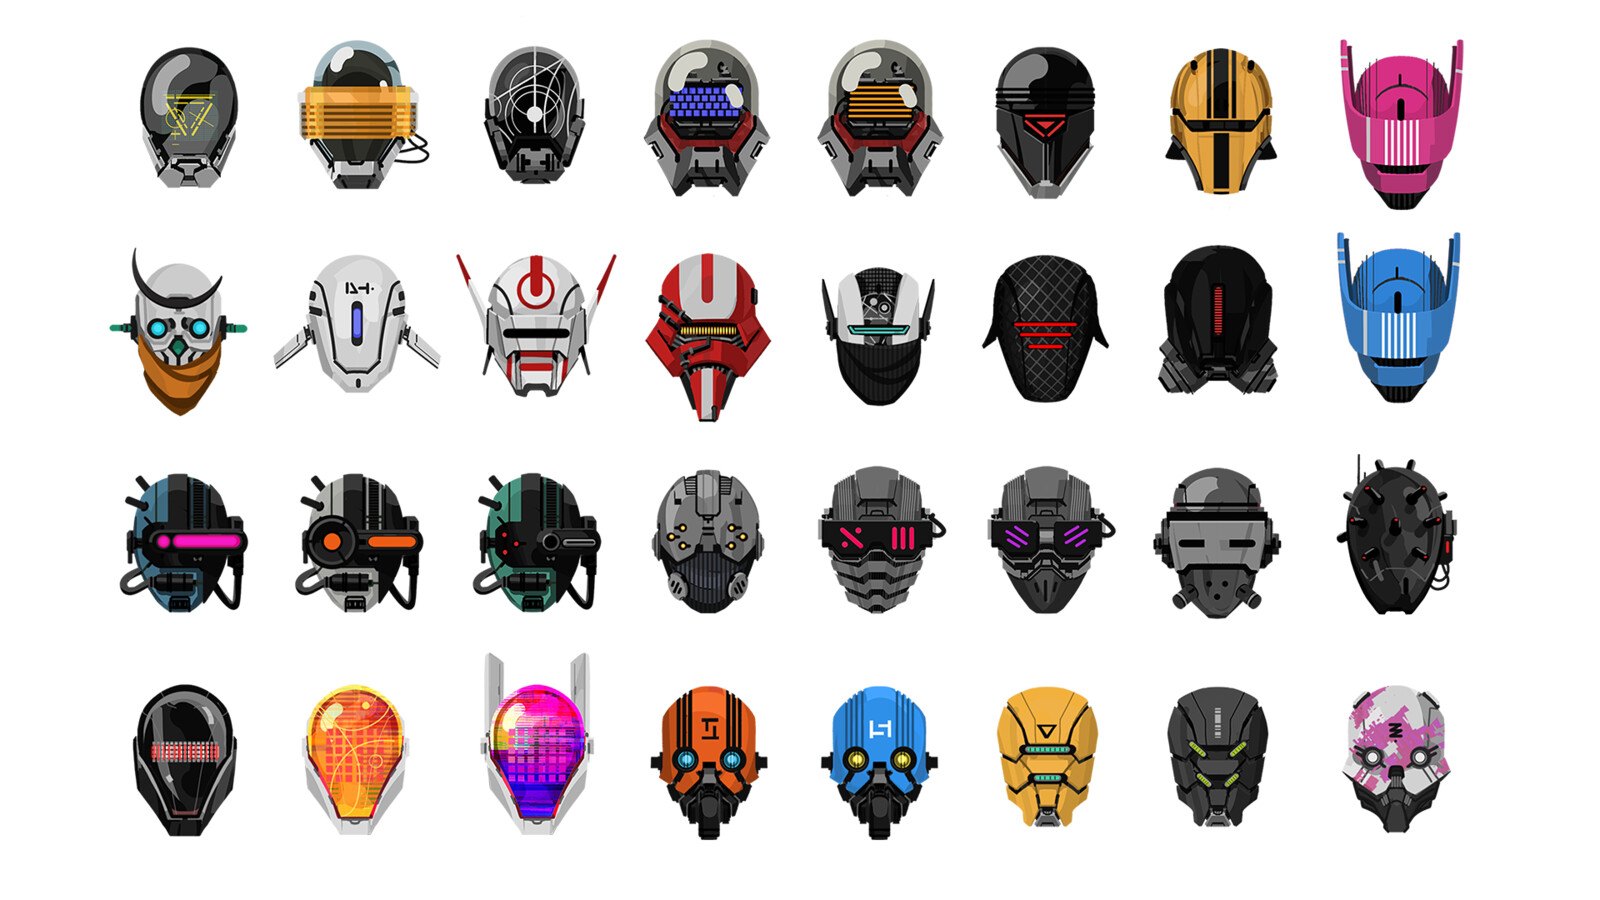 Many of the different helmets developed for the project